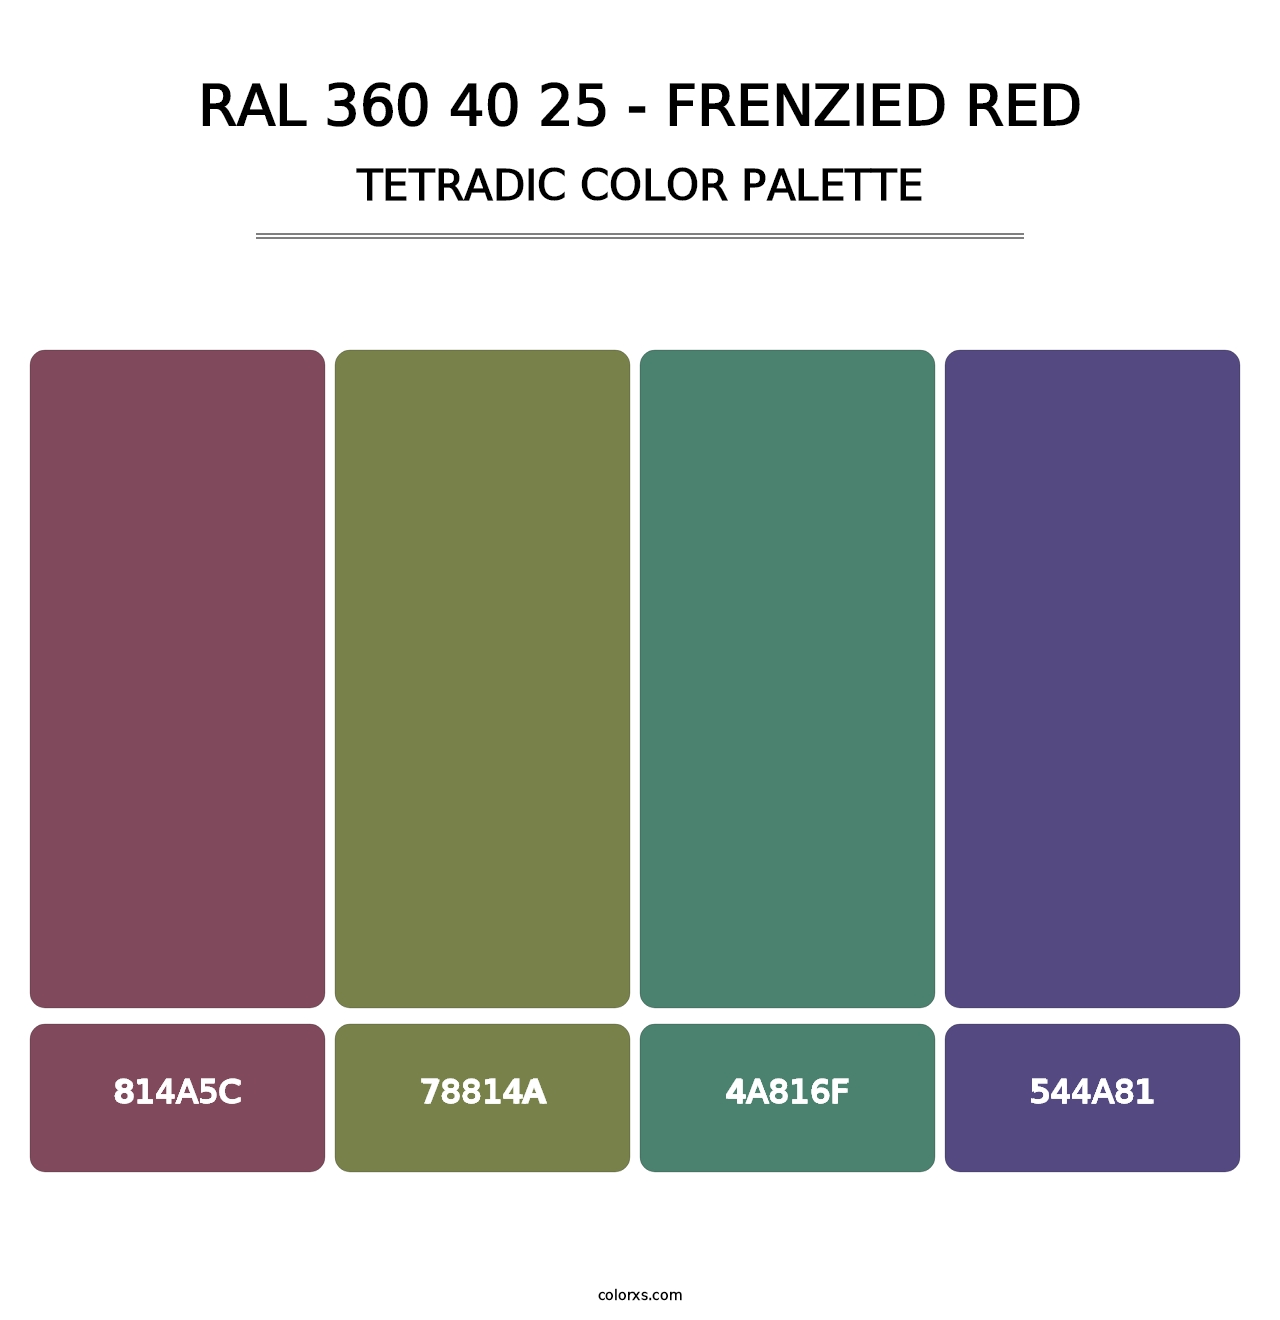 RAL 360 40 25 - Frenzied Red - Tetradic Color Palette